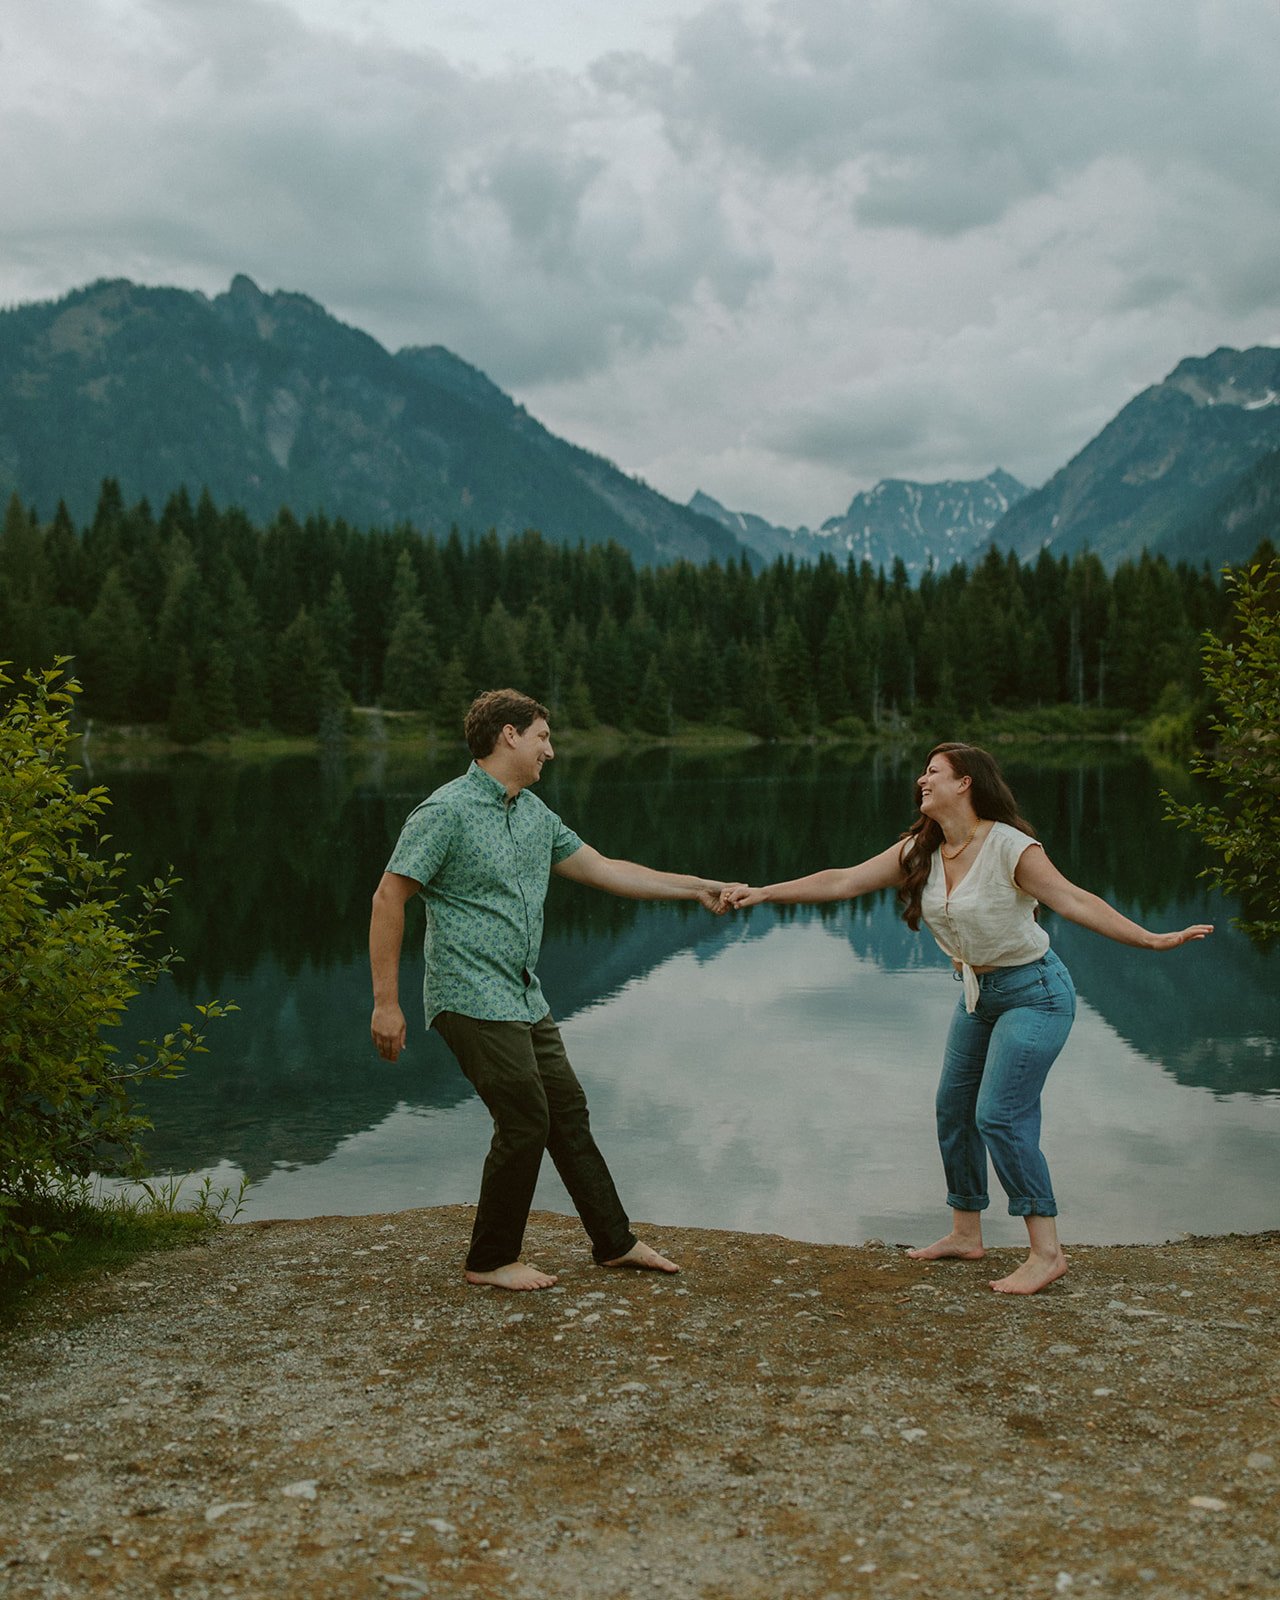 A Gold Creek Pond Outdoor Engagement Session - Shanean + Ian (125).jpg